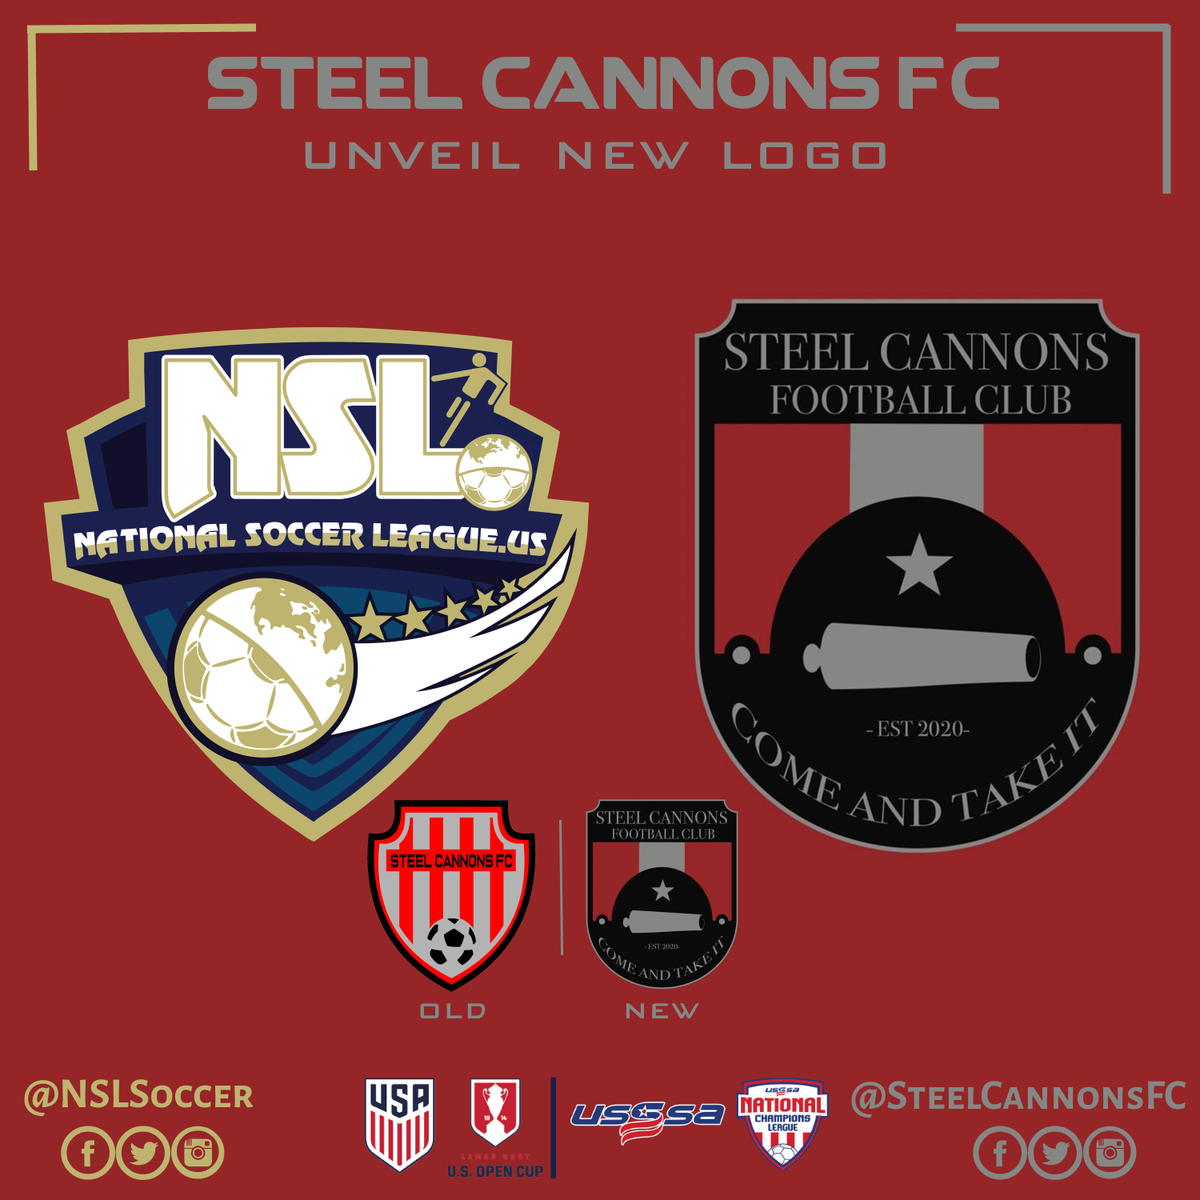 NSL News
National Soccer League US
NSL Texas Premier Division

Steel Cannons FC reveals new logo!!! 
OUR CITY, OUR HISTORY, OUR BRAND. COME AND TAKE IT! #REMAKEHISTORY #STEELTHESHOW
#SCFCTILLIDIE

@NSLSoccerLeague 
@NSLSoccer 
@NSLPremier 
@NSLTX 
@cannons_fc 
#NSLSoccer